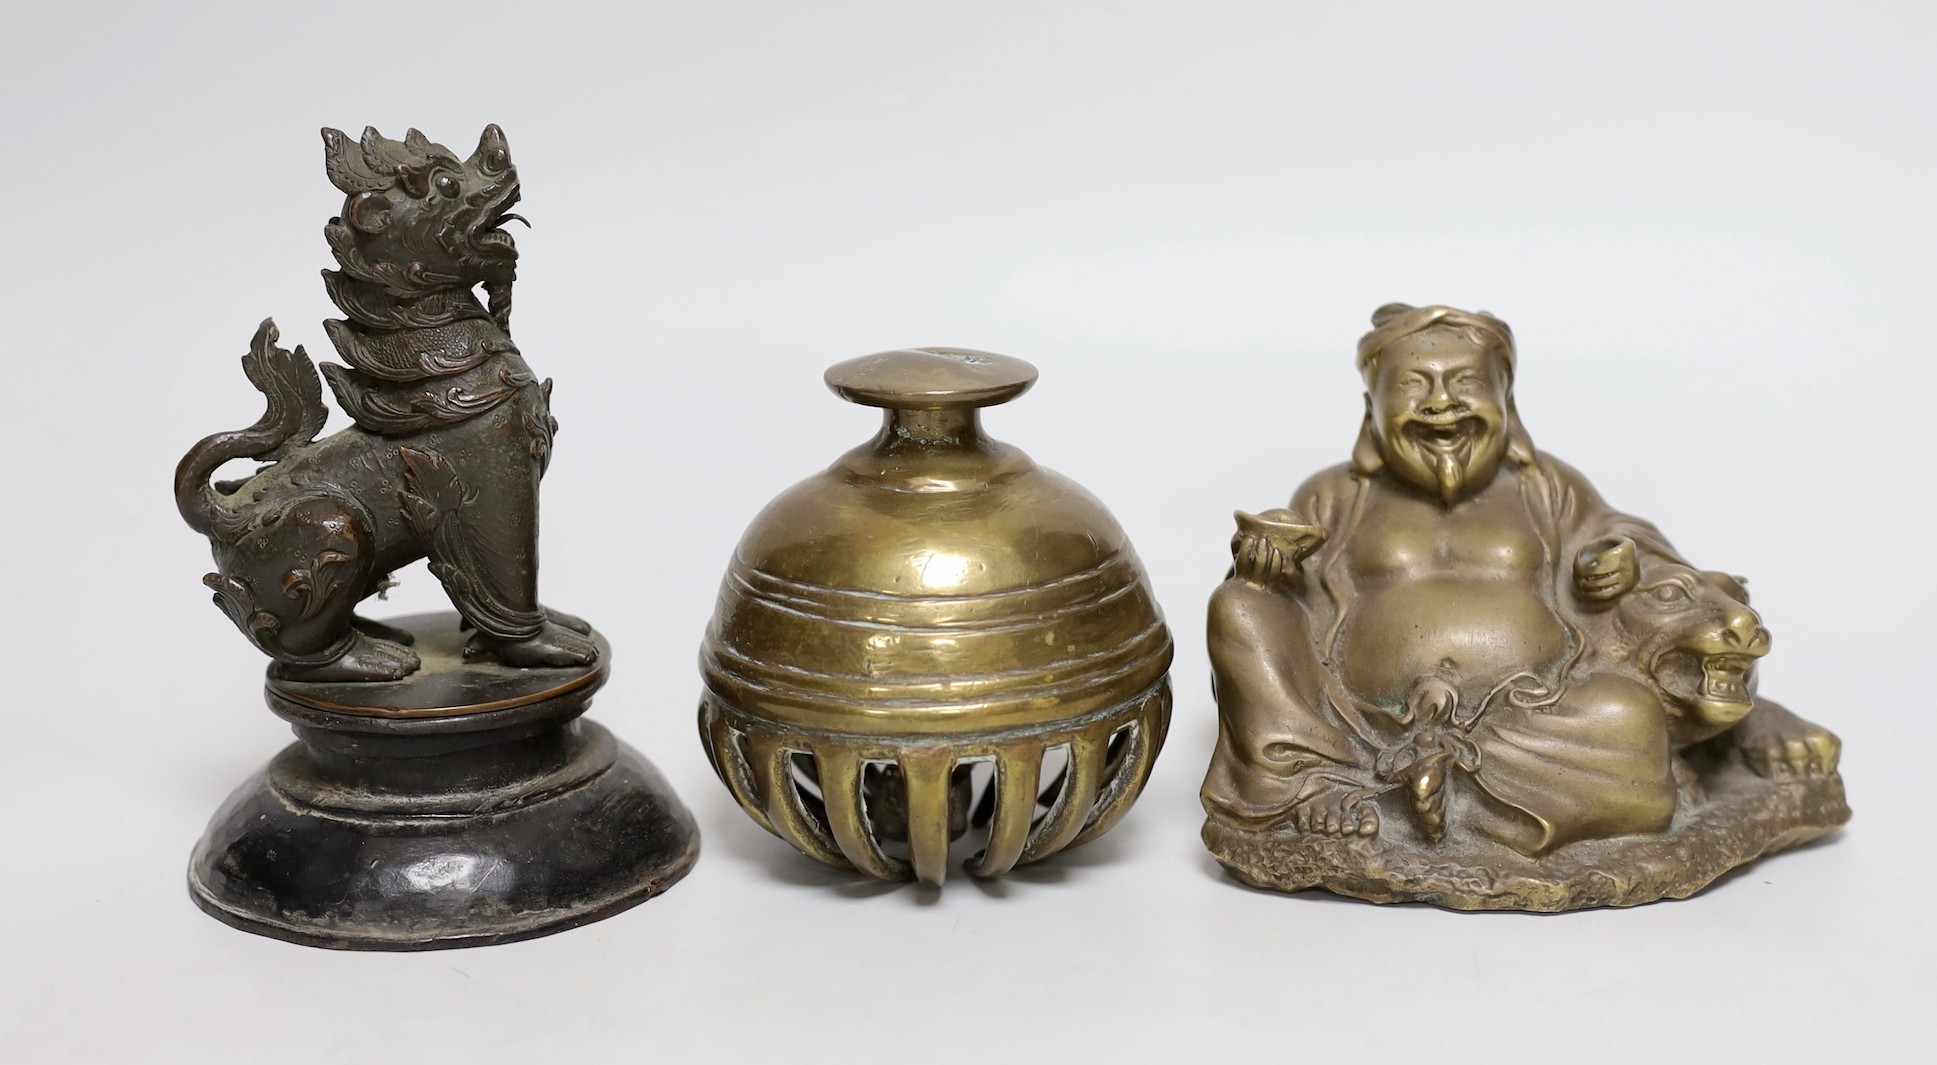 A Chinese bronze seated figure of Budai and tiger together with an Indian elephant bell and a Burmese bronze temple dog